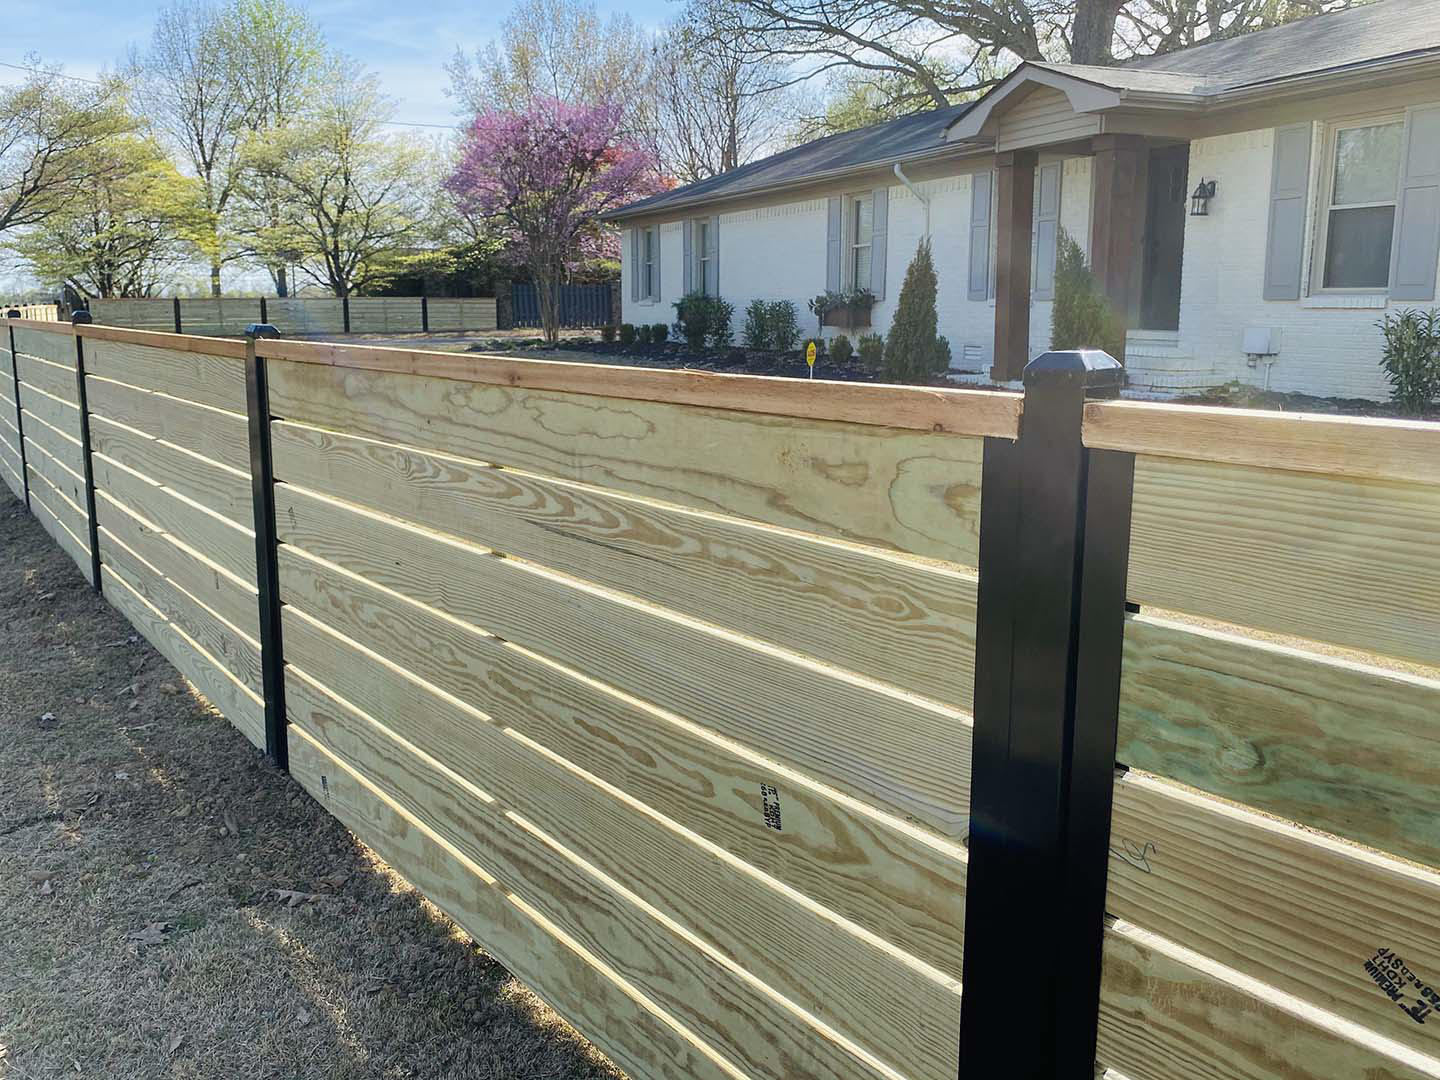  Trenton Tennessee residential fencing contractor